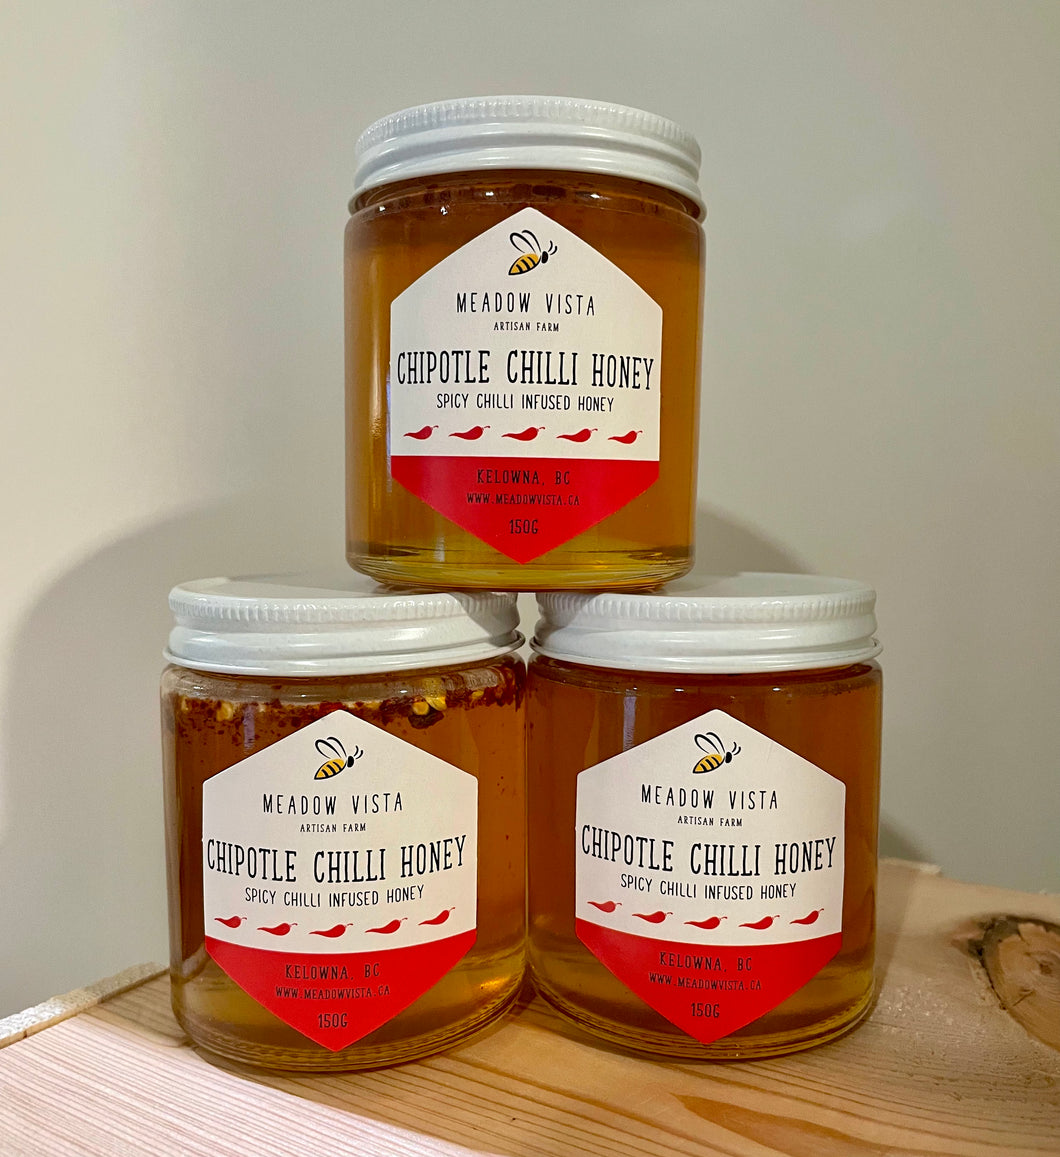 Chipotle Chili Infused Honey